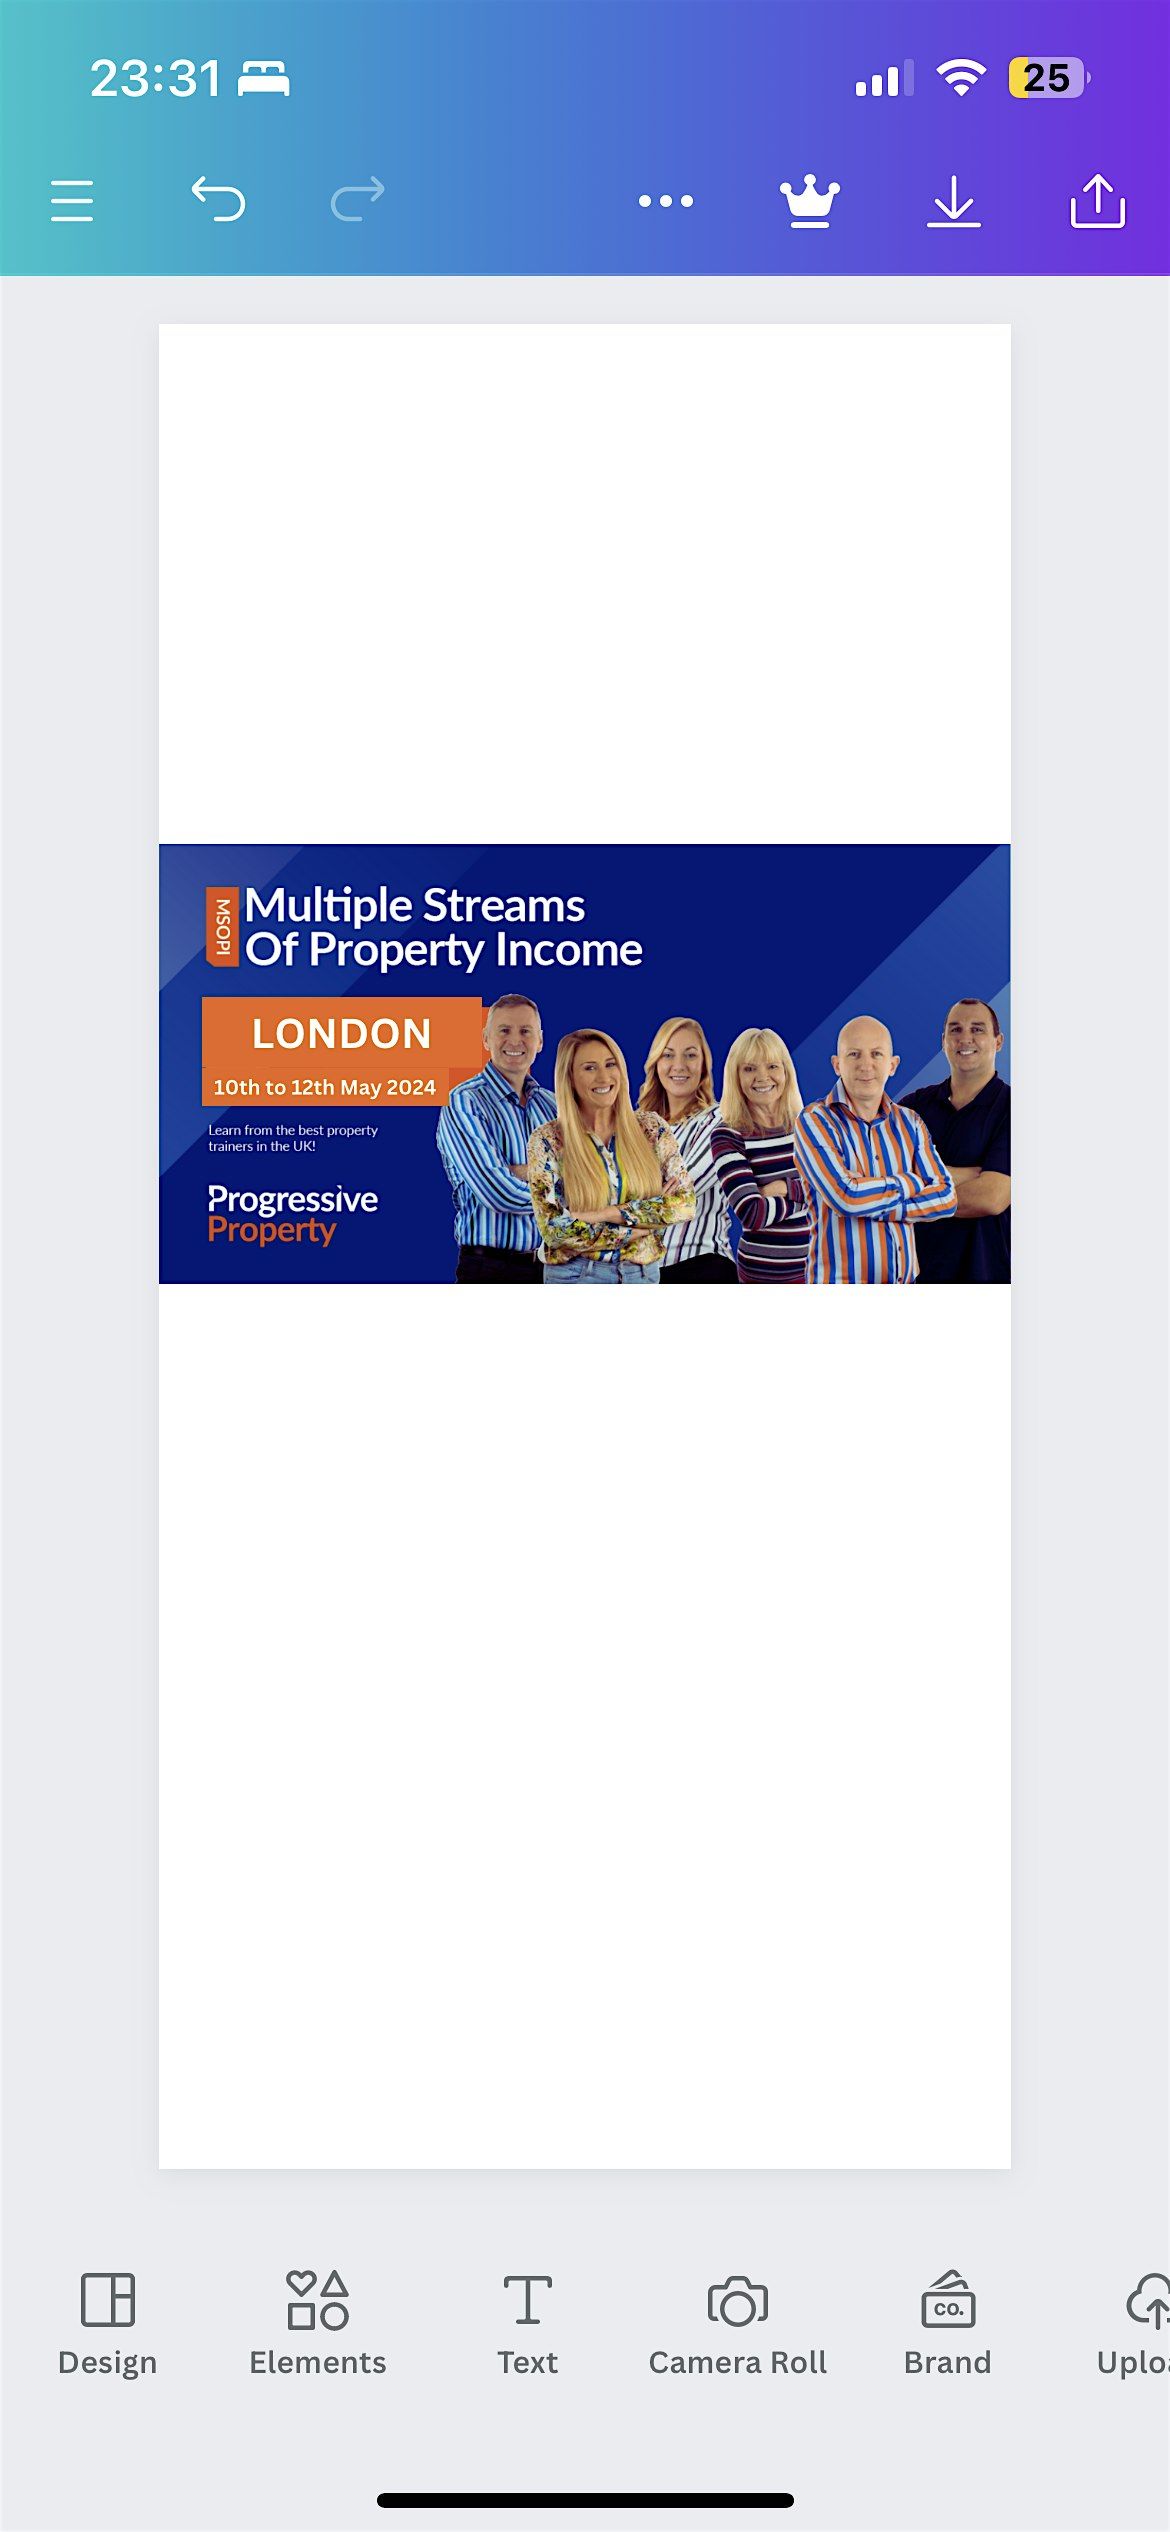 LONDON | Property Networking Event | Multiple Streams Of Property Income